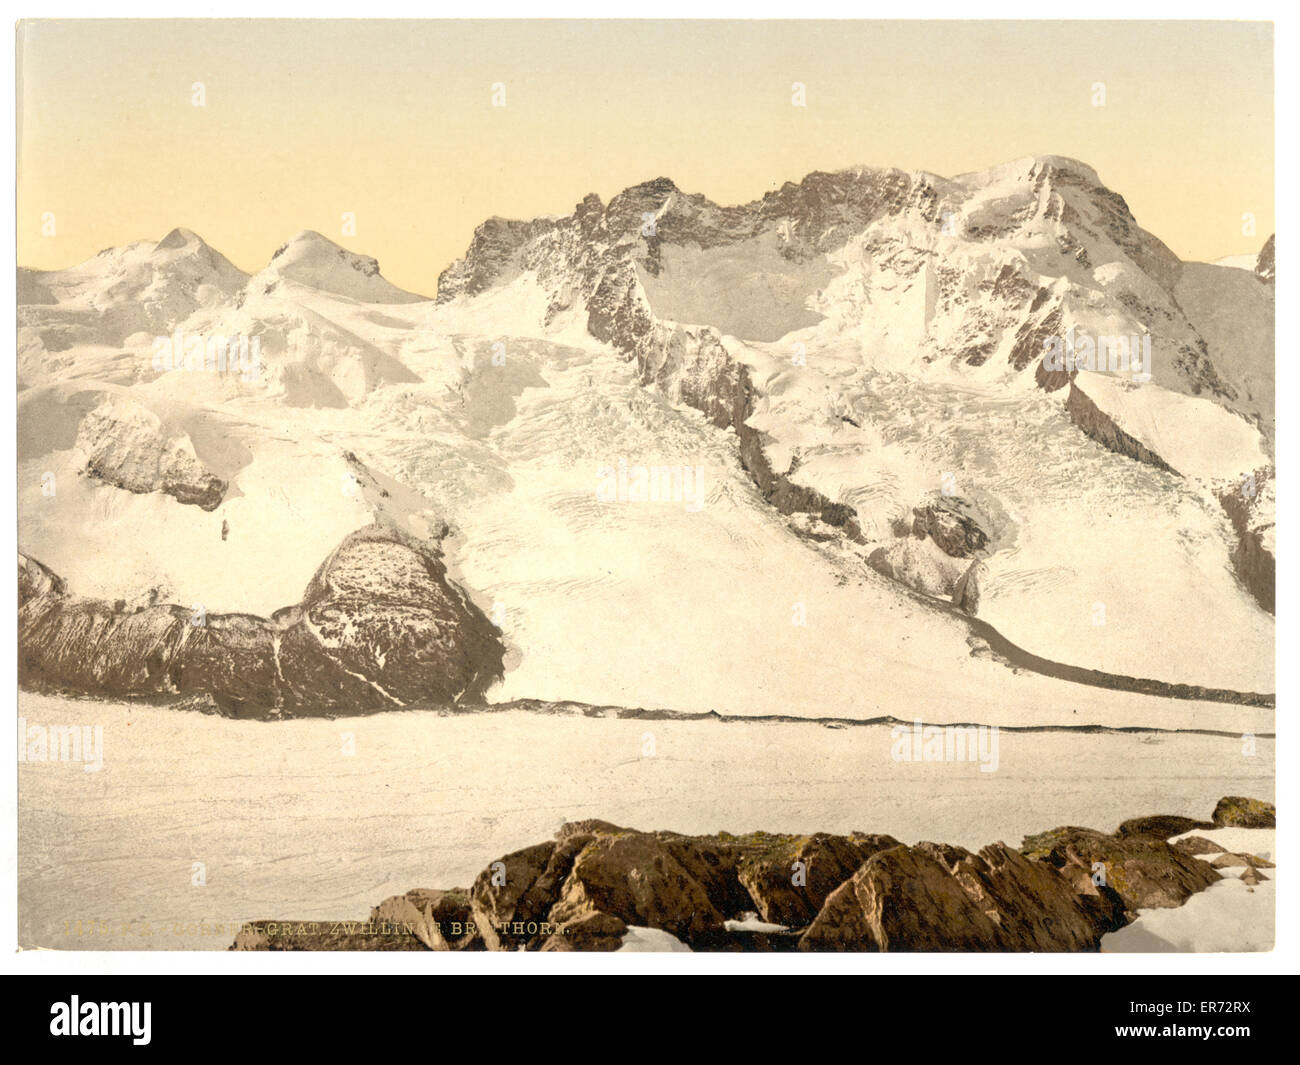 The Twins (Castor and Pollux), the Breithorn, etc., Valais, Stock Photo